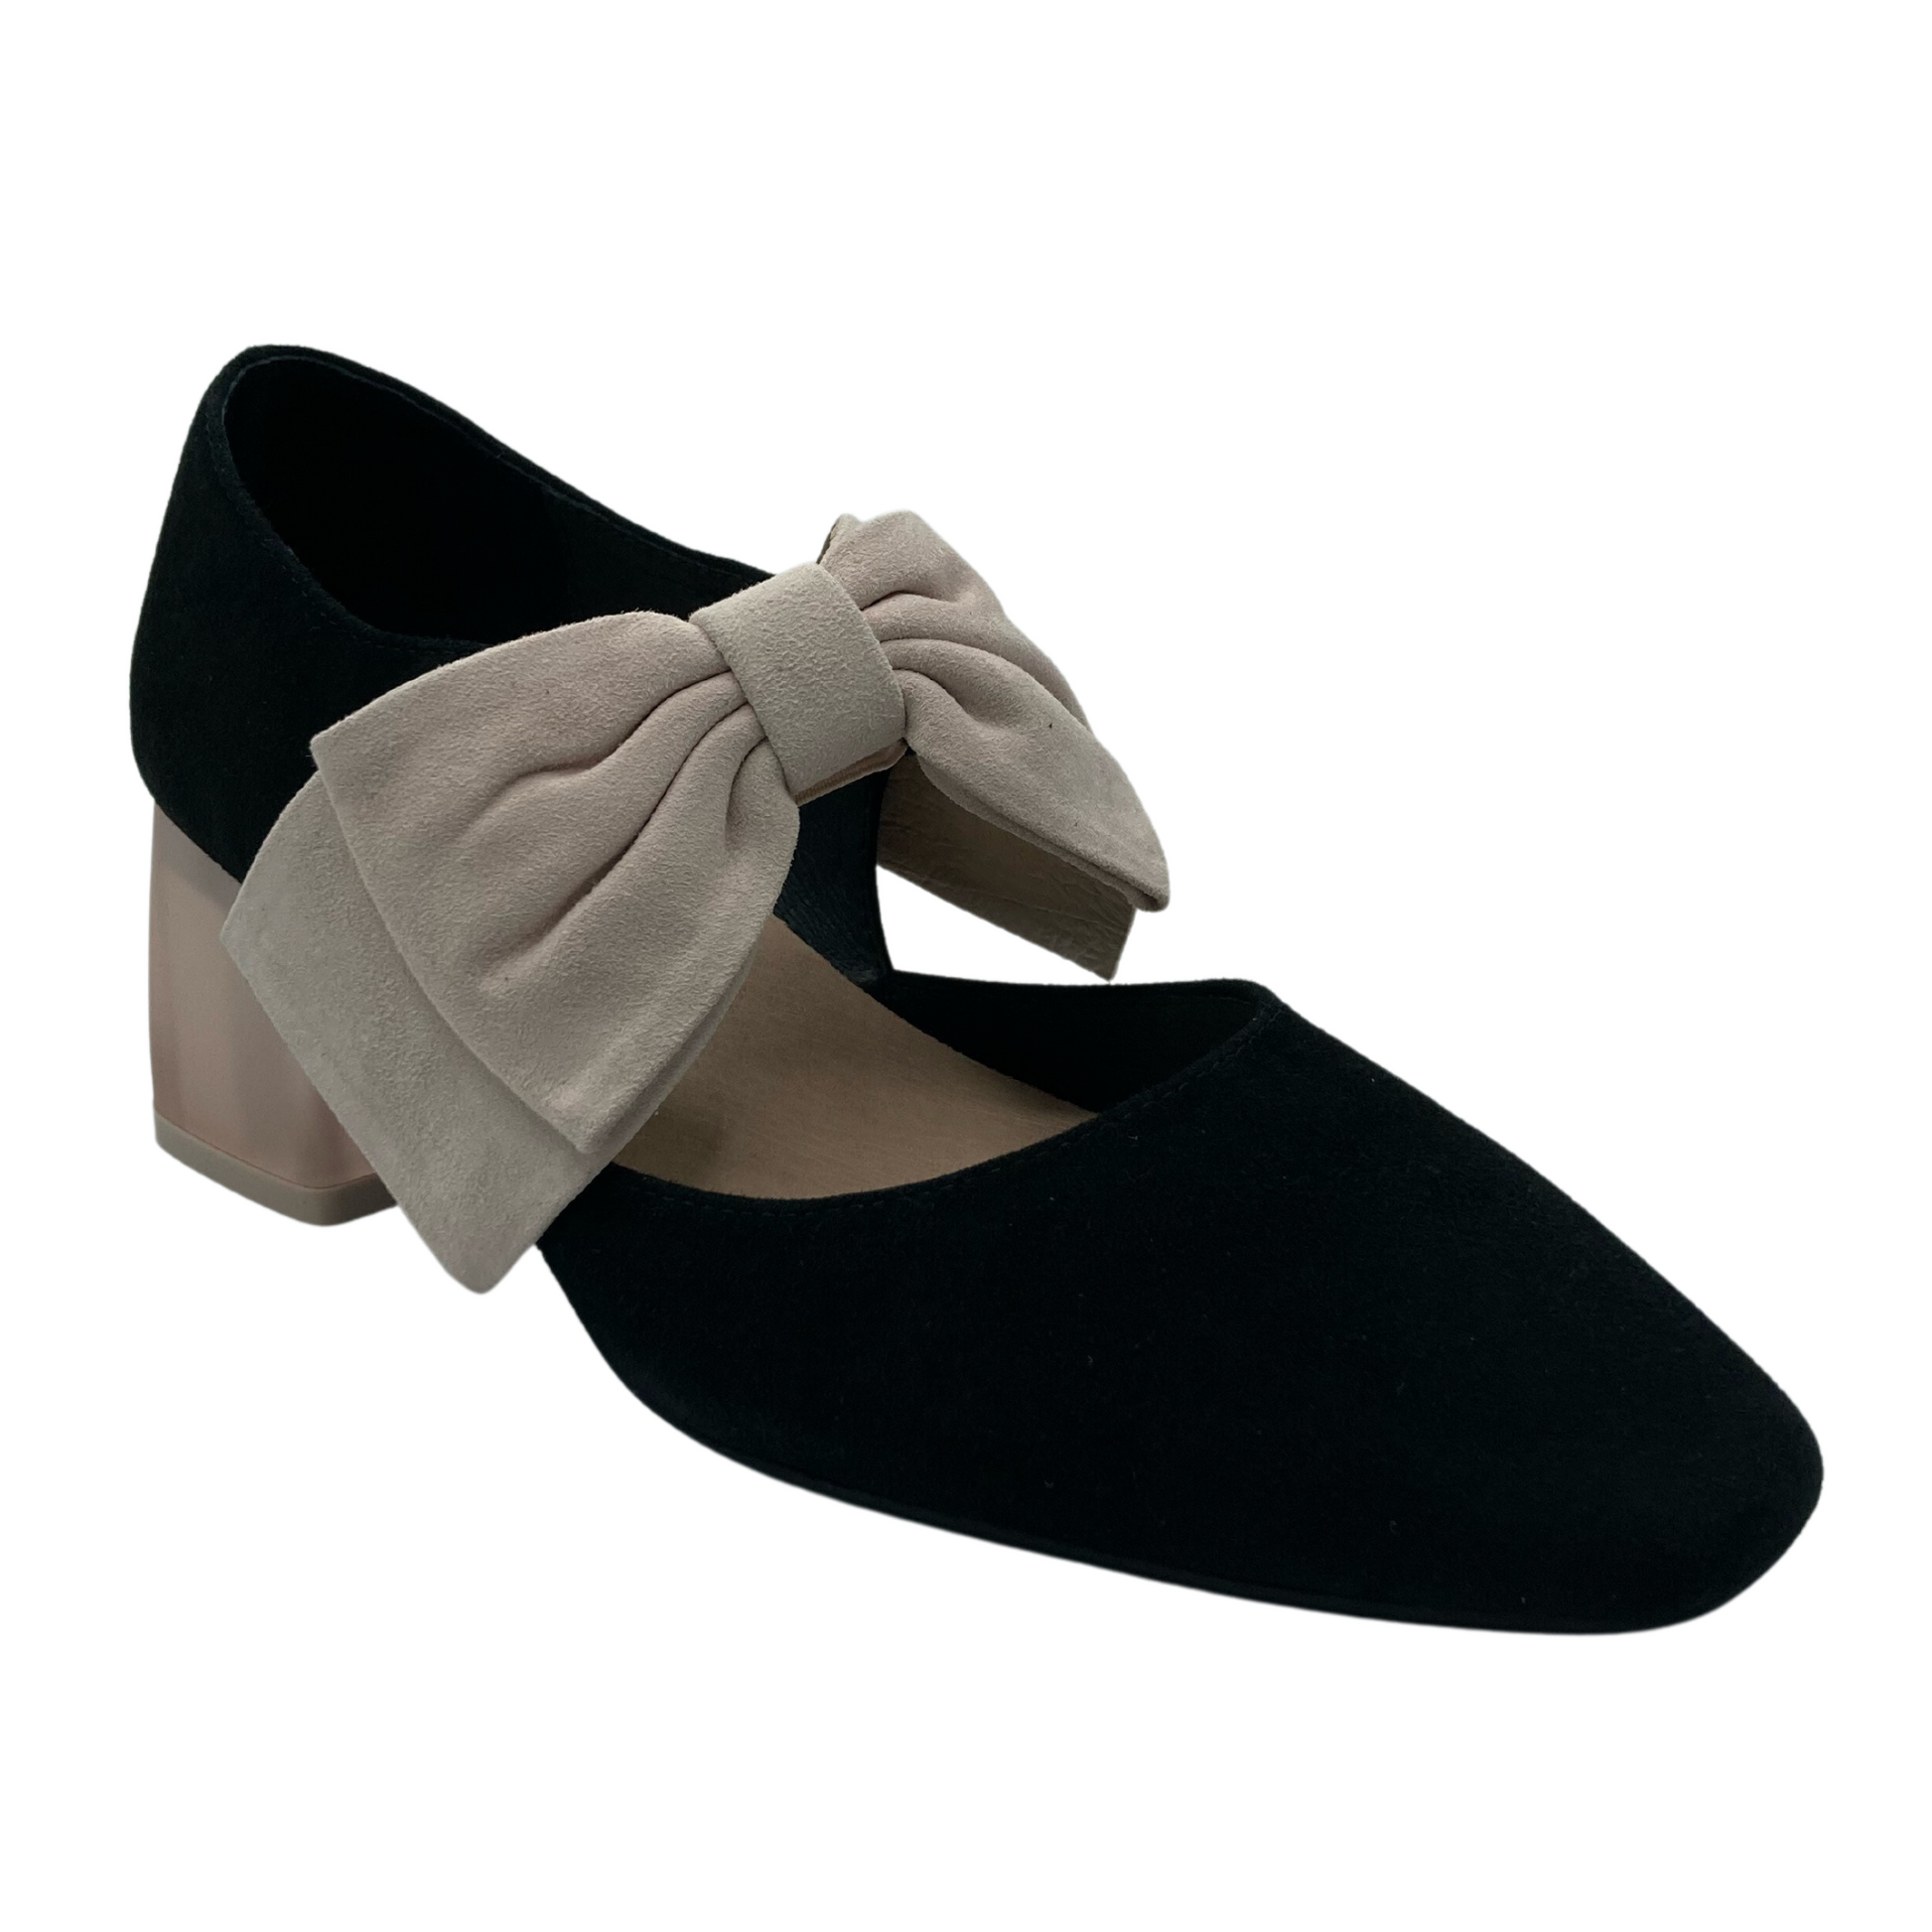 45 degree angled view of soft black mary jane shoe with cream coloured bow and lucite heel